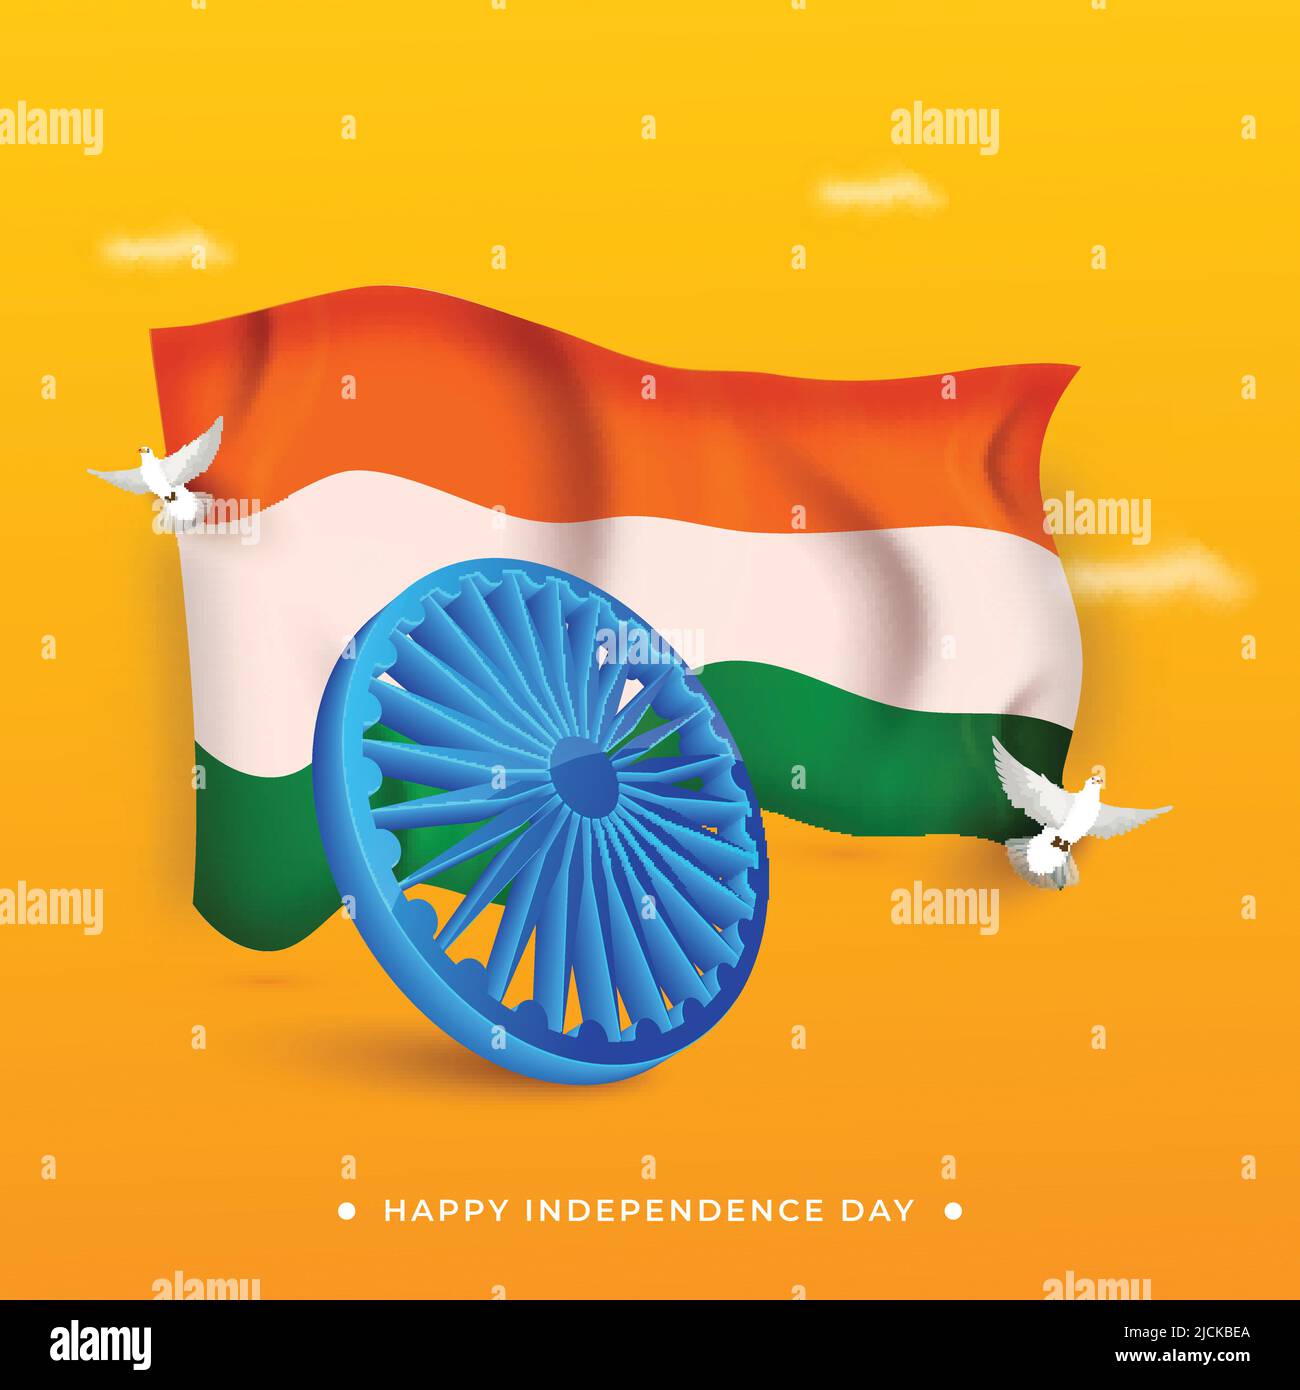 Happy Independence Day Concept With 3D Ashoka Wheel, India Flag ...